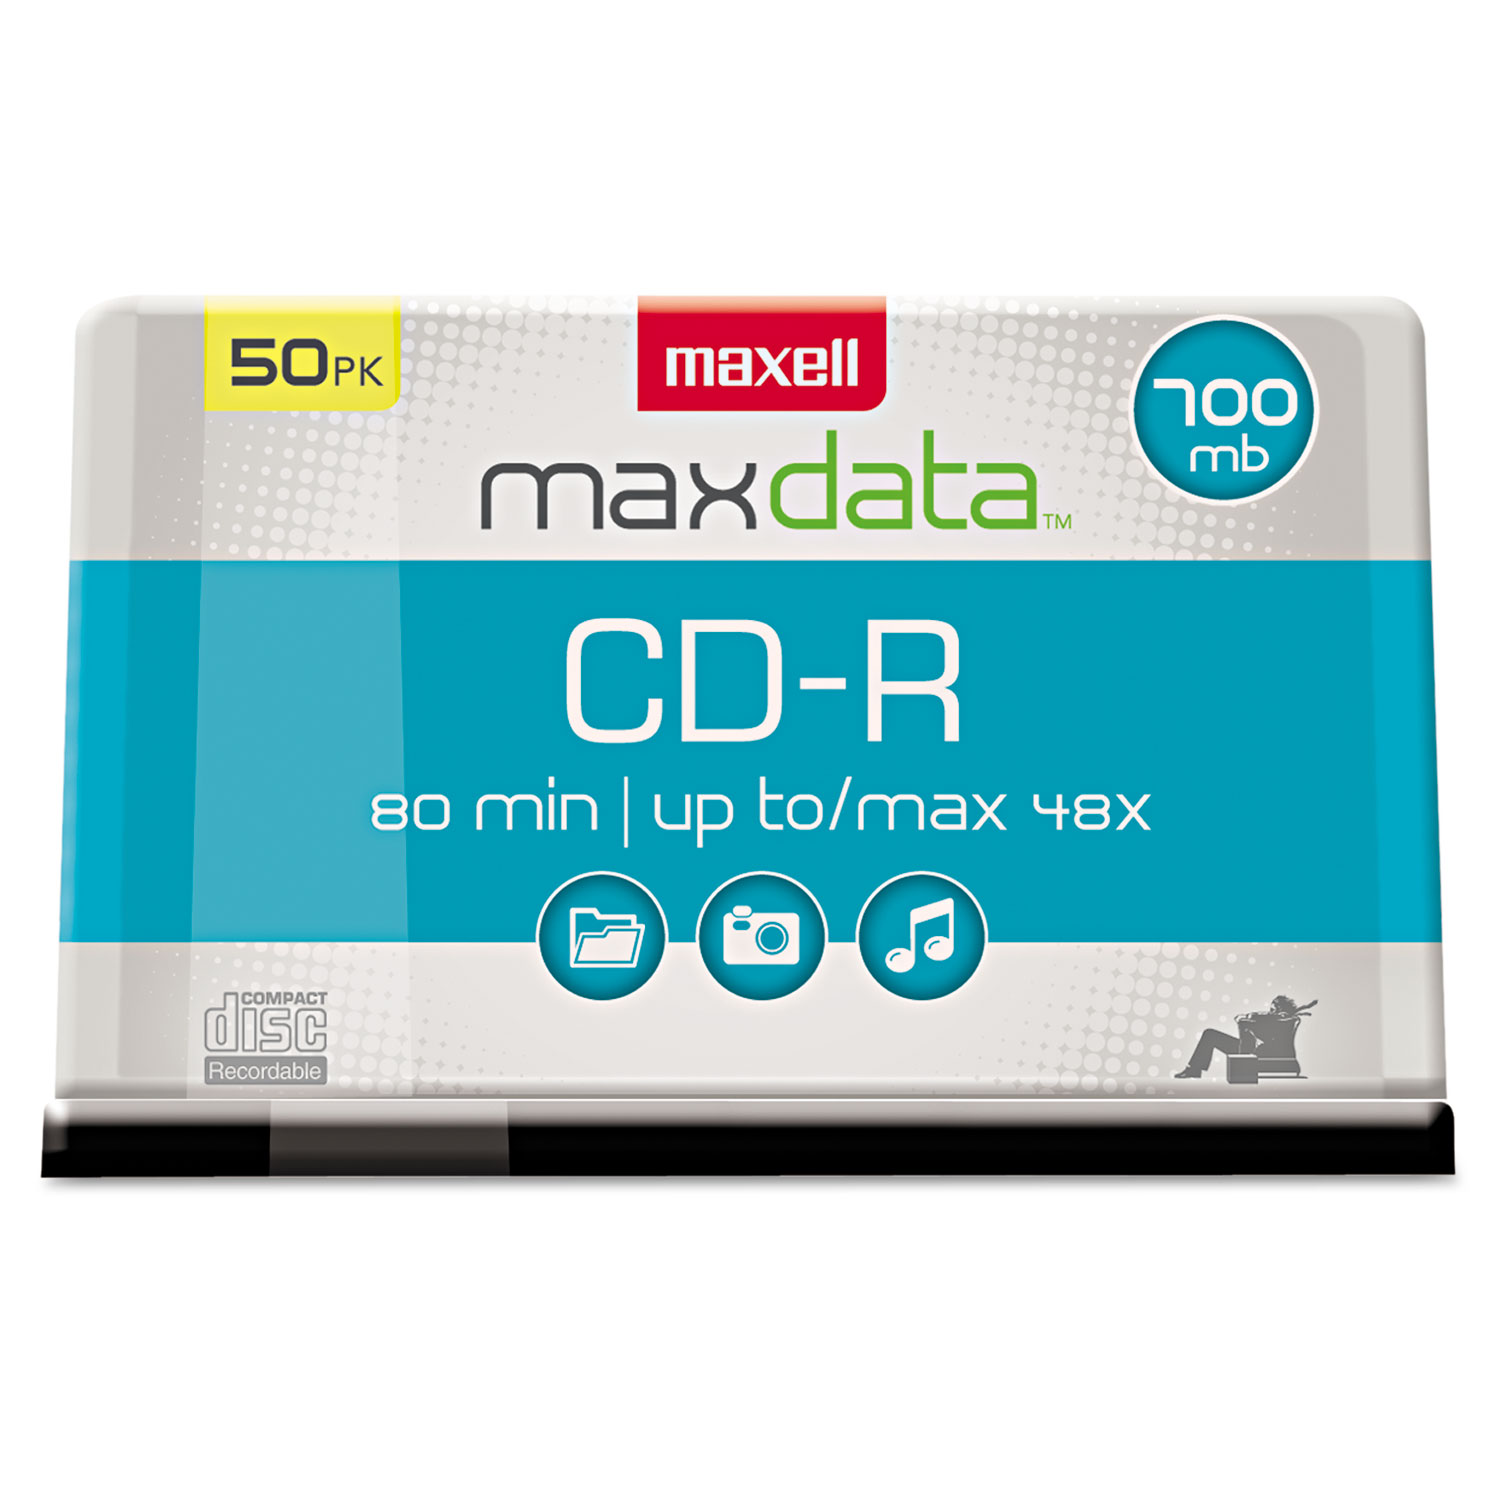 MAXELL CD-R MUSIC XL-II DIGITAL AUDIO RECORDABLE 80MIN - 25 pieces